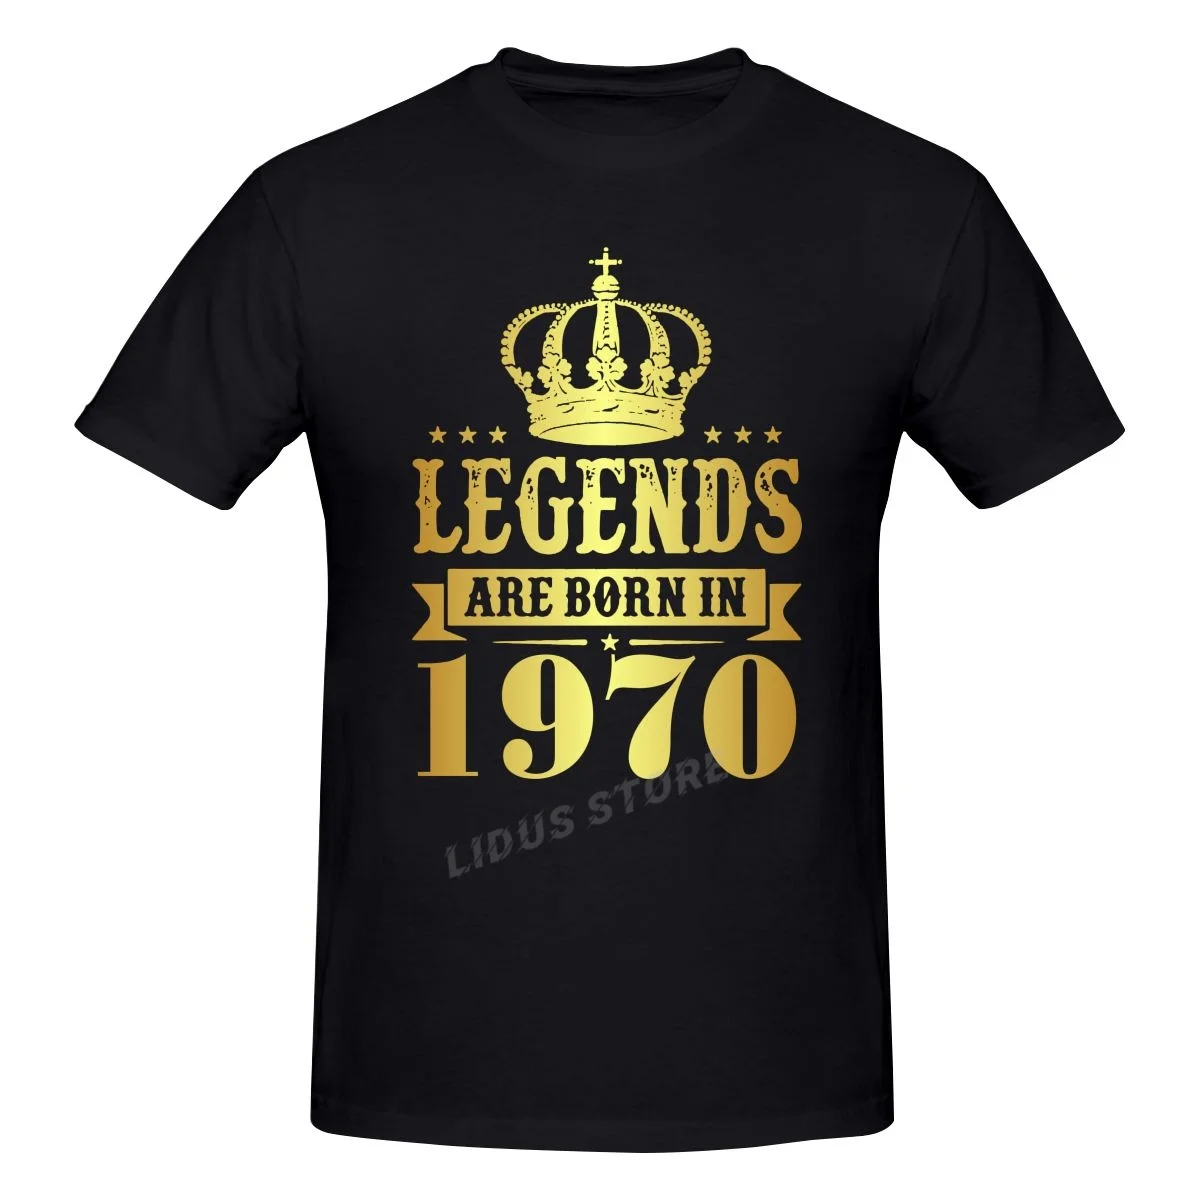 Legends Are Born In 1970 52 Years For 52th Birthday Gift T shirts Harajuku Short Sleeve T-shirt Graphics Tshirt Brands Tee Tops